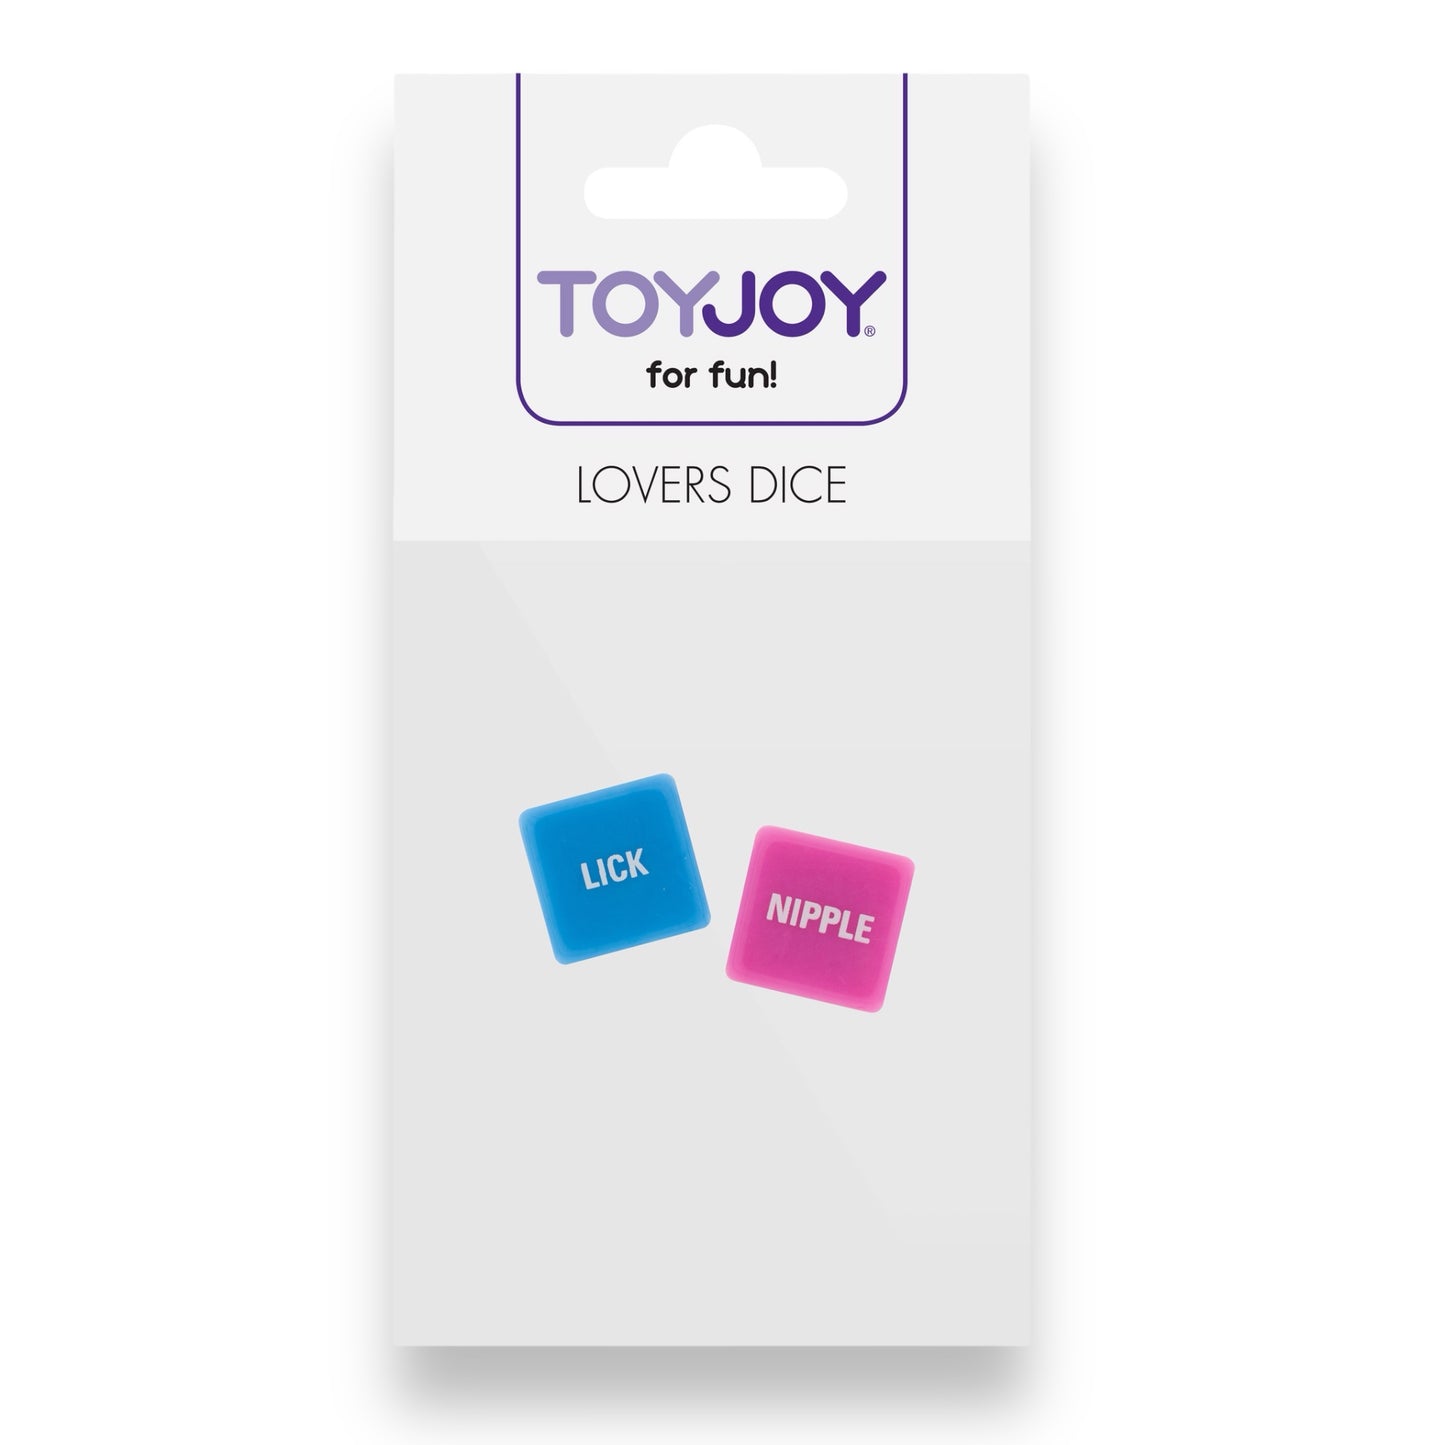 Kinky Pleasure - BOT04 - Toy Joy Sex Lovers Dice - Pink And Blue - 2 Pieces in Bag